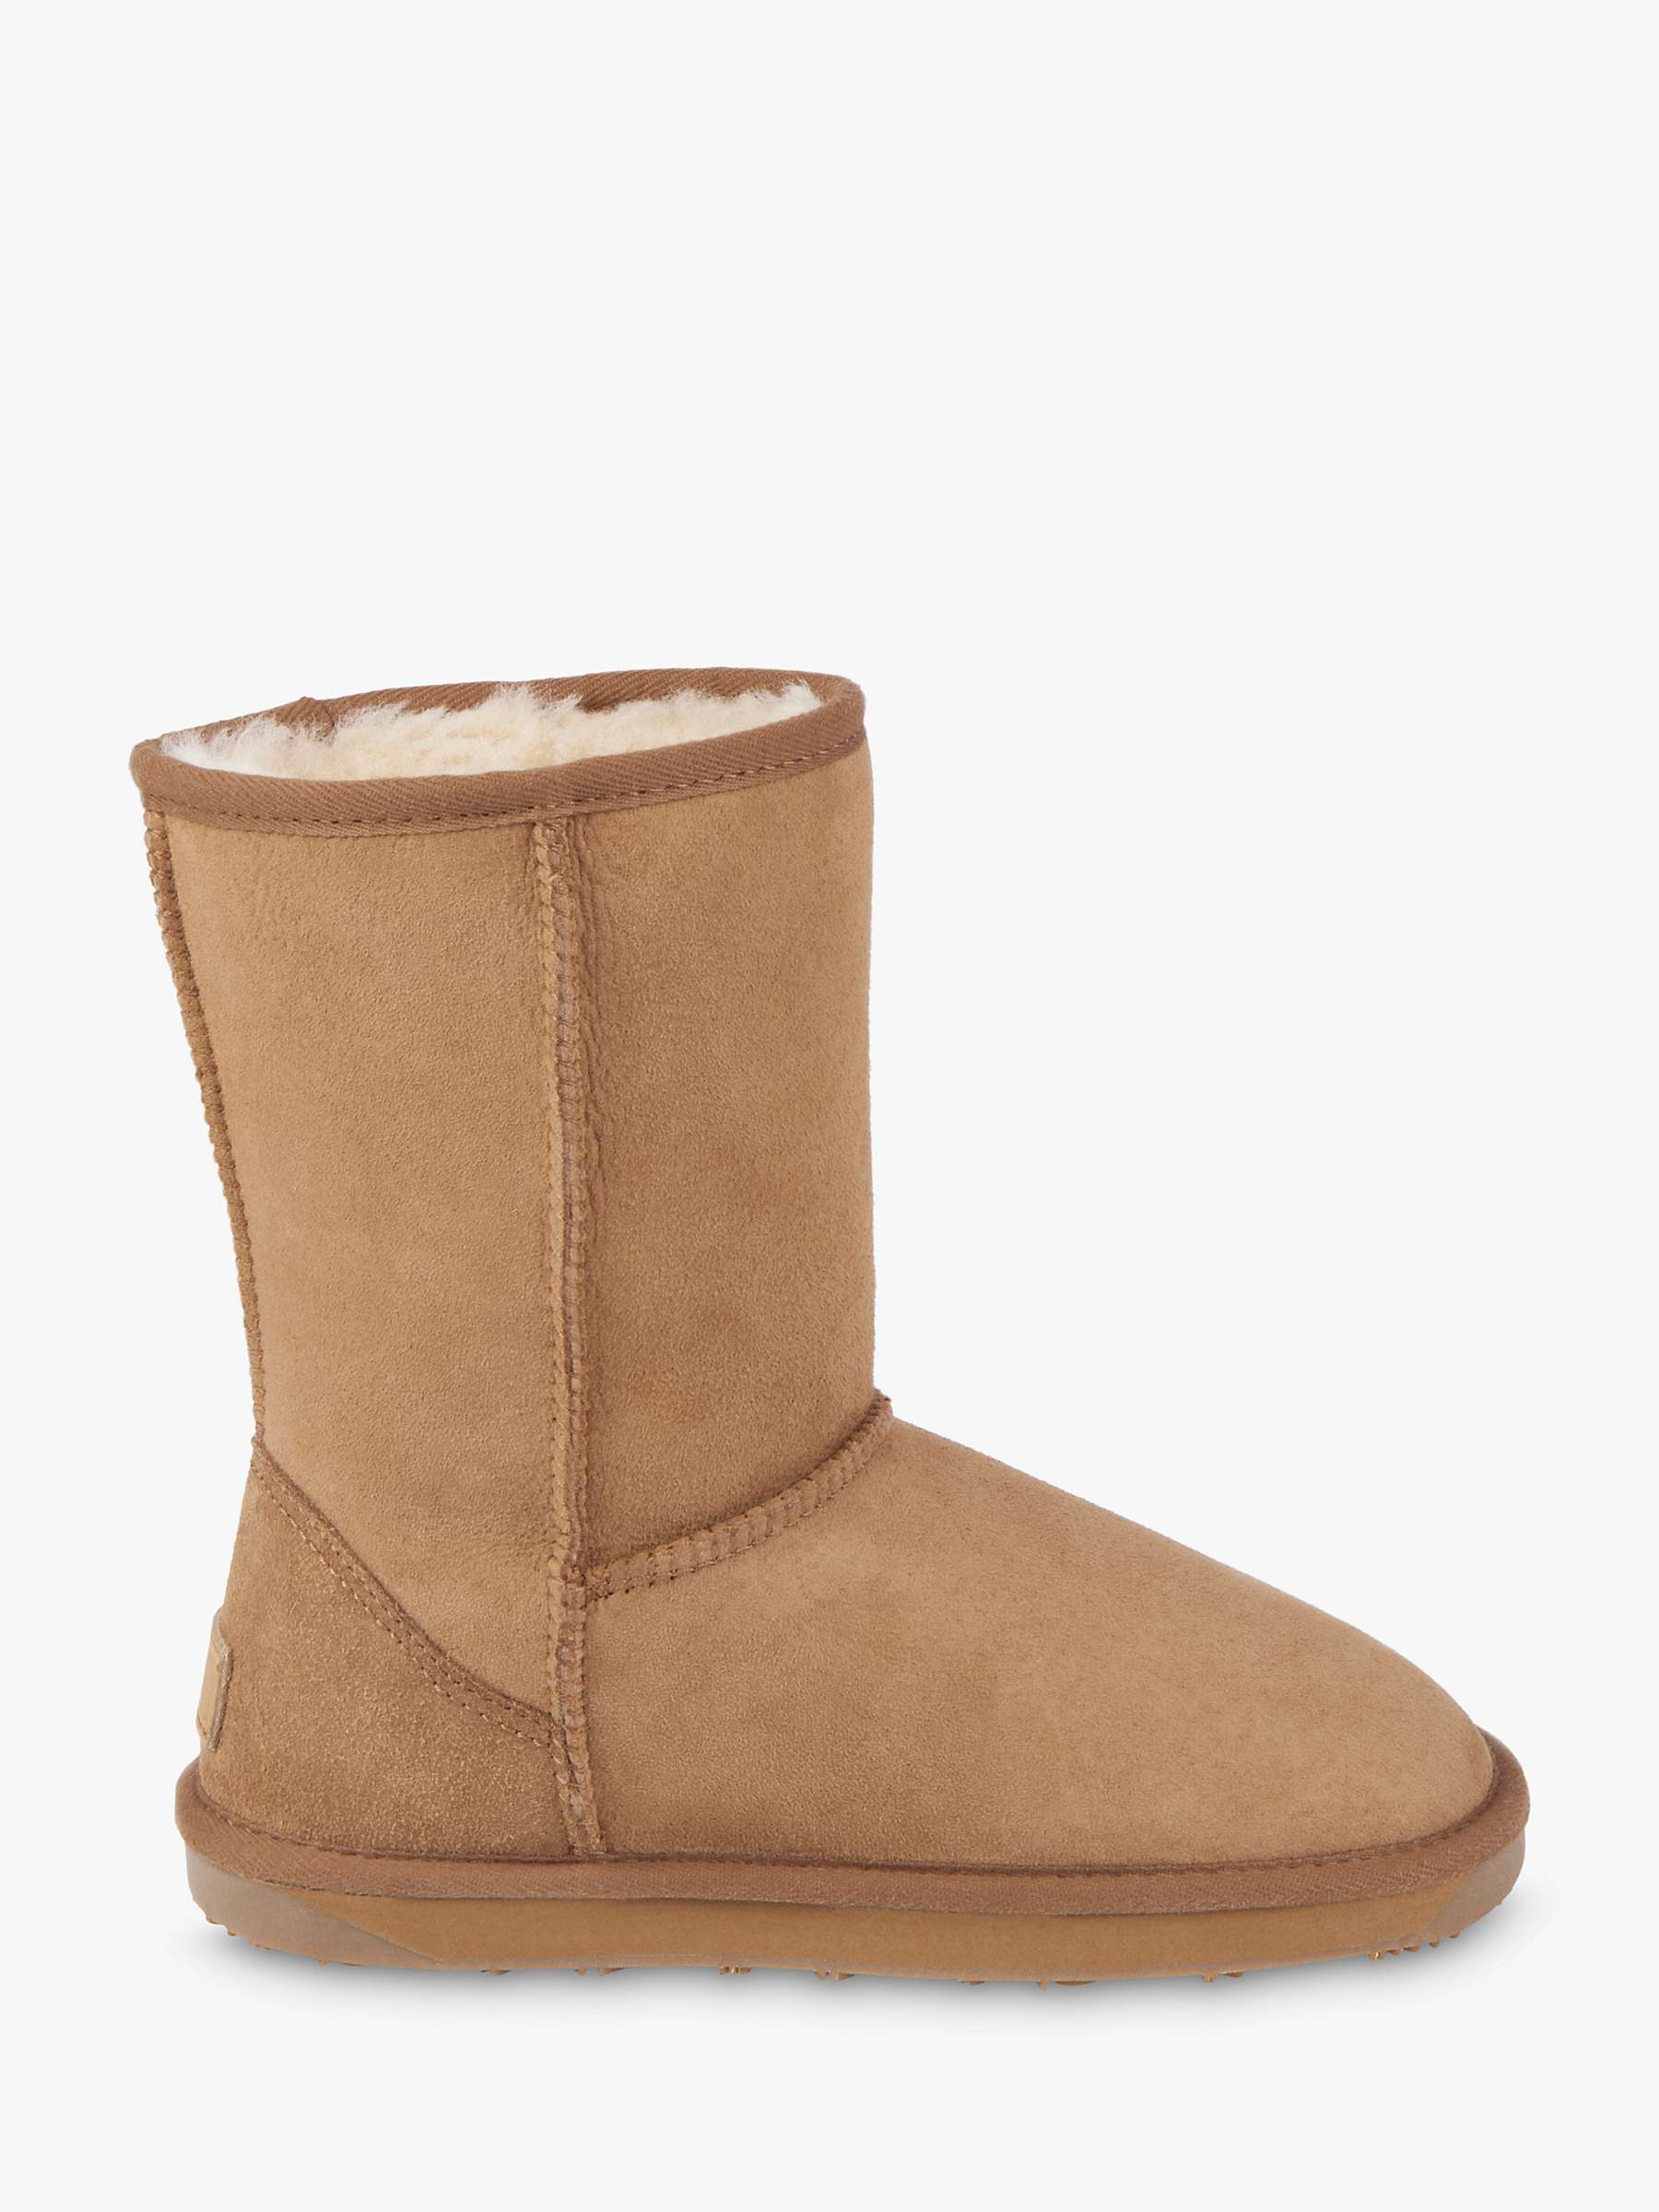 Buy Just Sheepskin Short Classic Ankle Boots Online at johnlewis.com